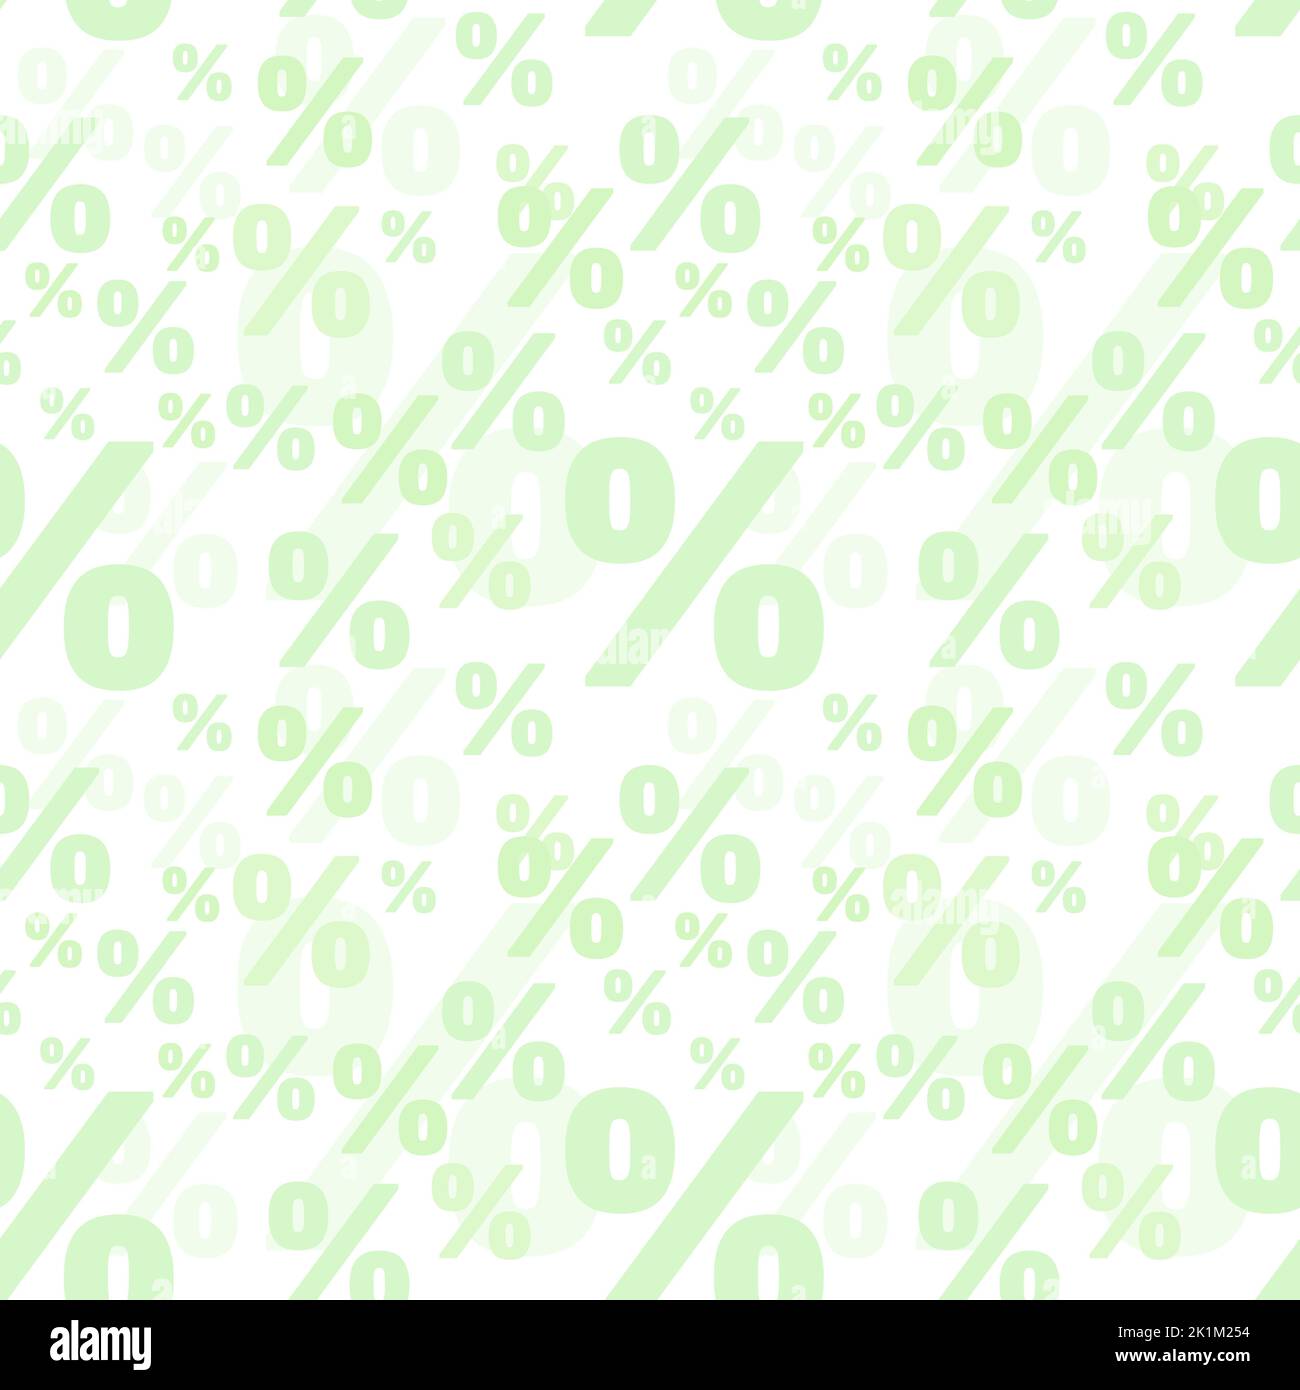 Percent seamless background. Advertisement promo texture with percent symbol. Light green color. Stock Vector